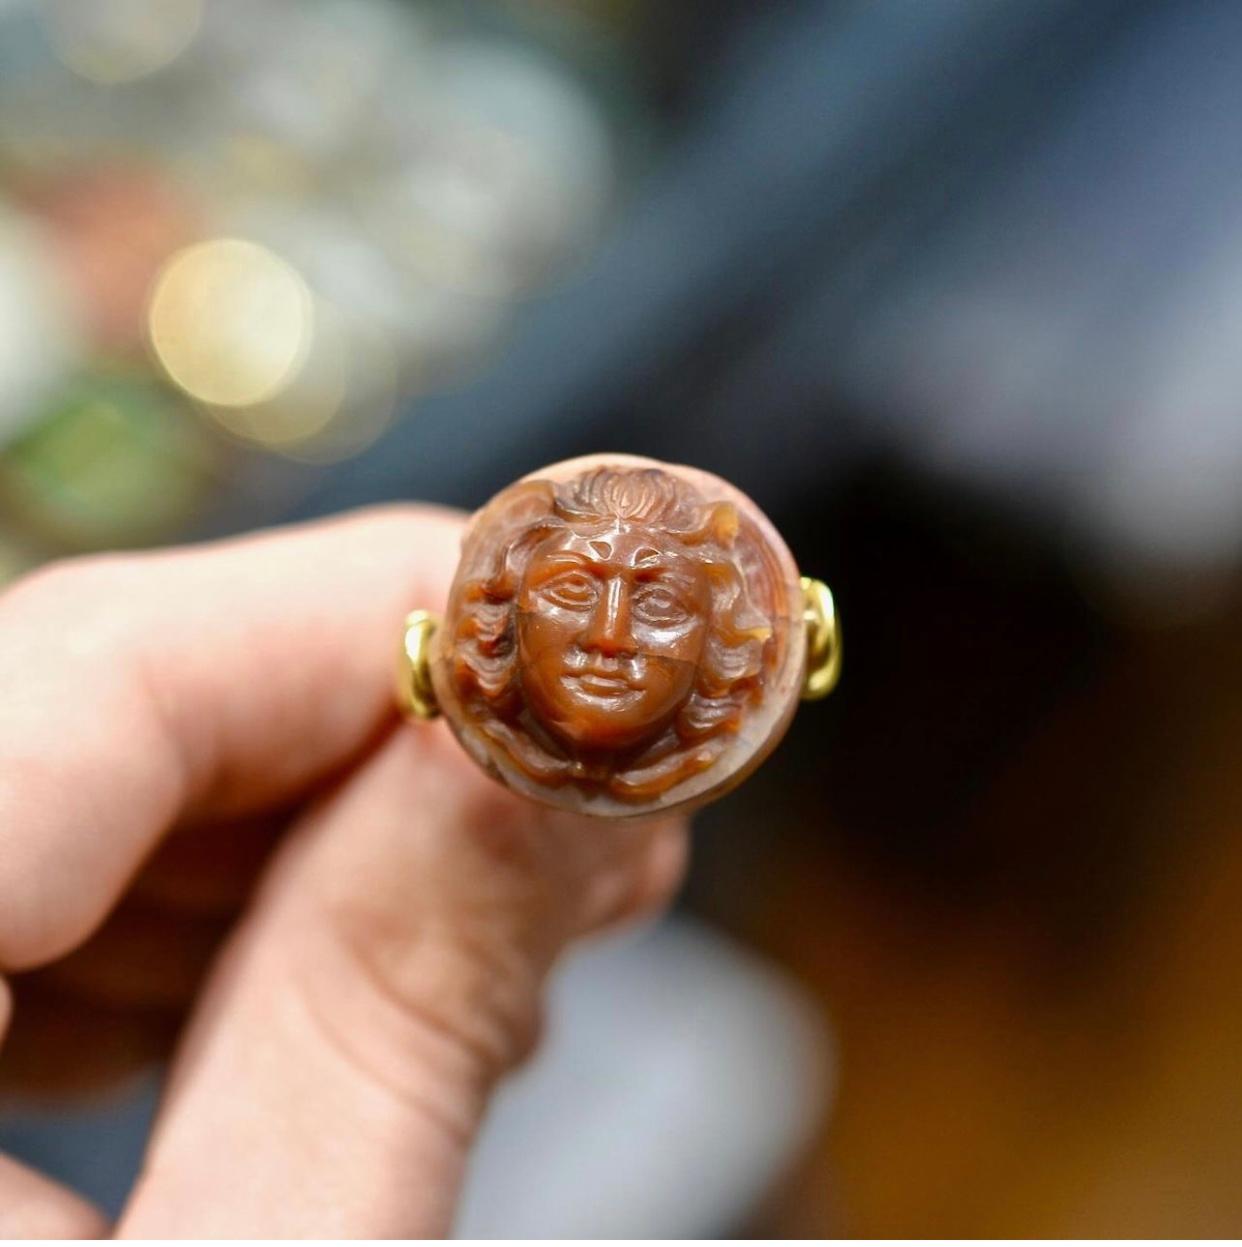 18kt Yellow Gold Agate Medusa Cameo Men's Ring III - IV Sec. AD In Excellent Condition For Sale In Firenze, IT